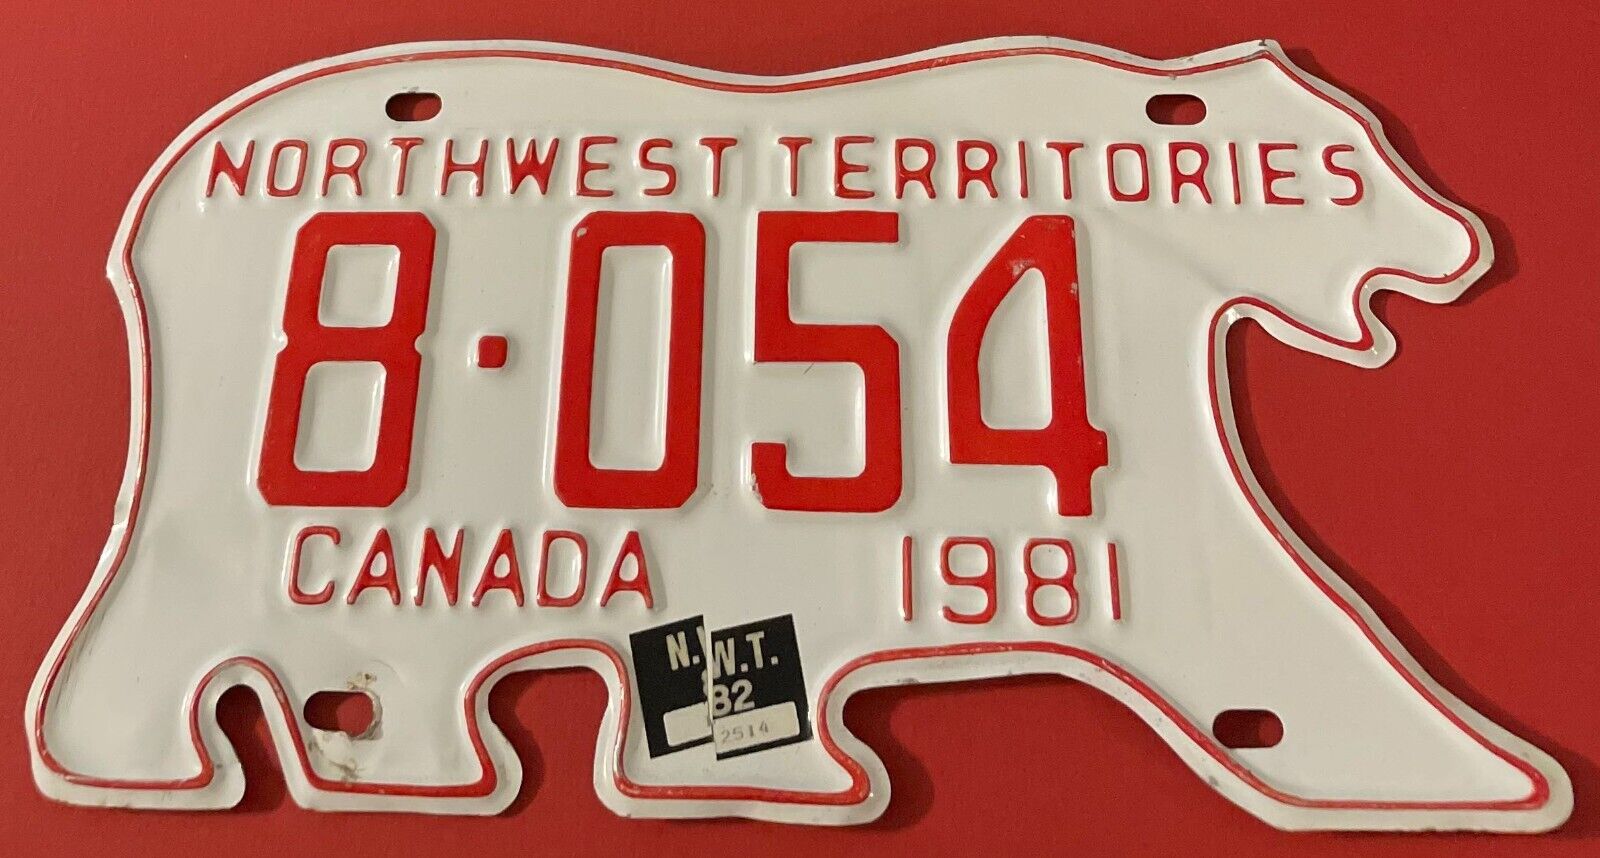 1981 1982 Canada Northwest Territories License Plate 8-054 Bear Shaped